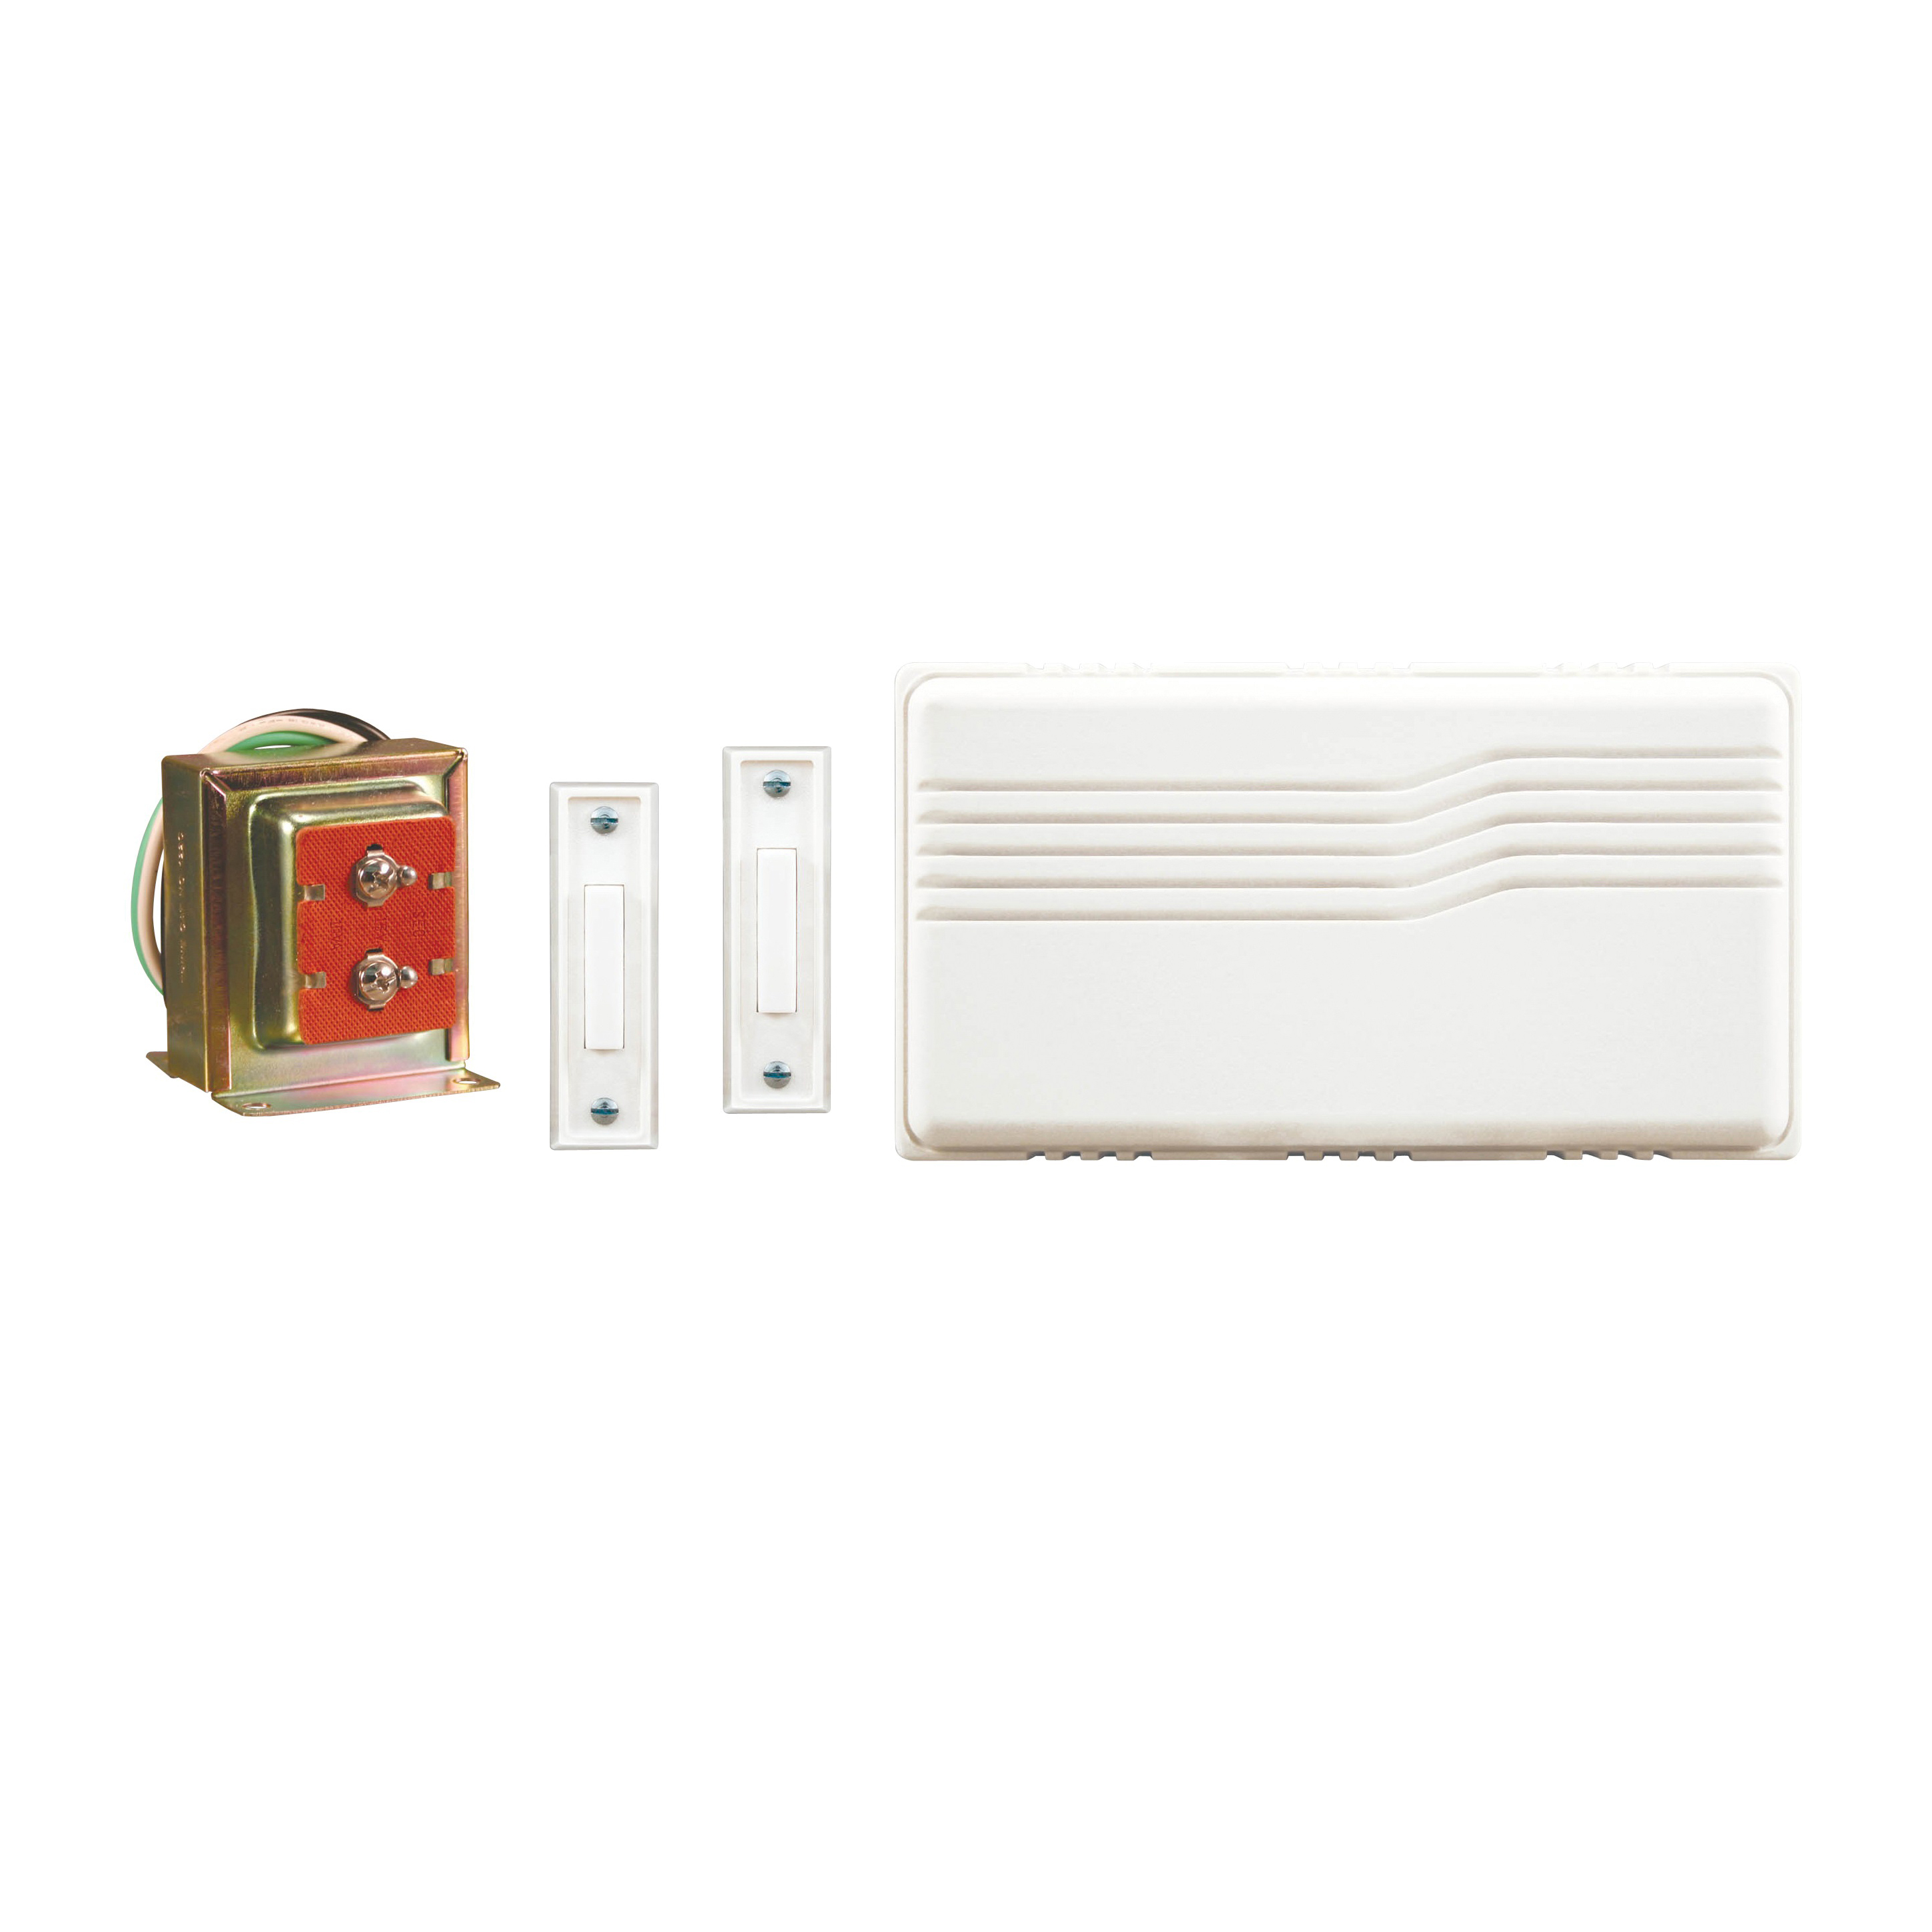 Heath Zenith SL-27102-02 Doorbell Kit, Wired, 16 V, Ding, Ding-Dong Tone, 95 dB, White - 1